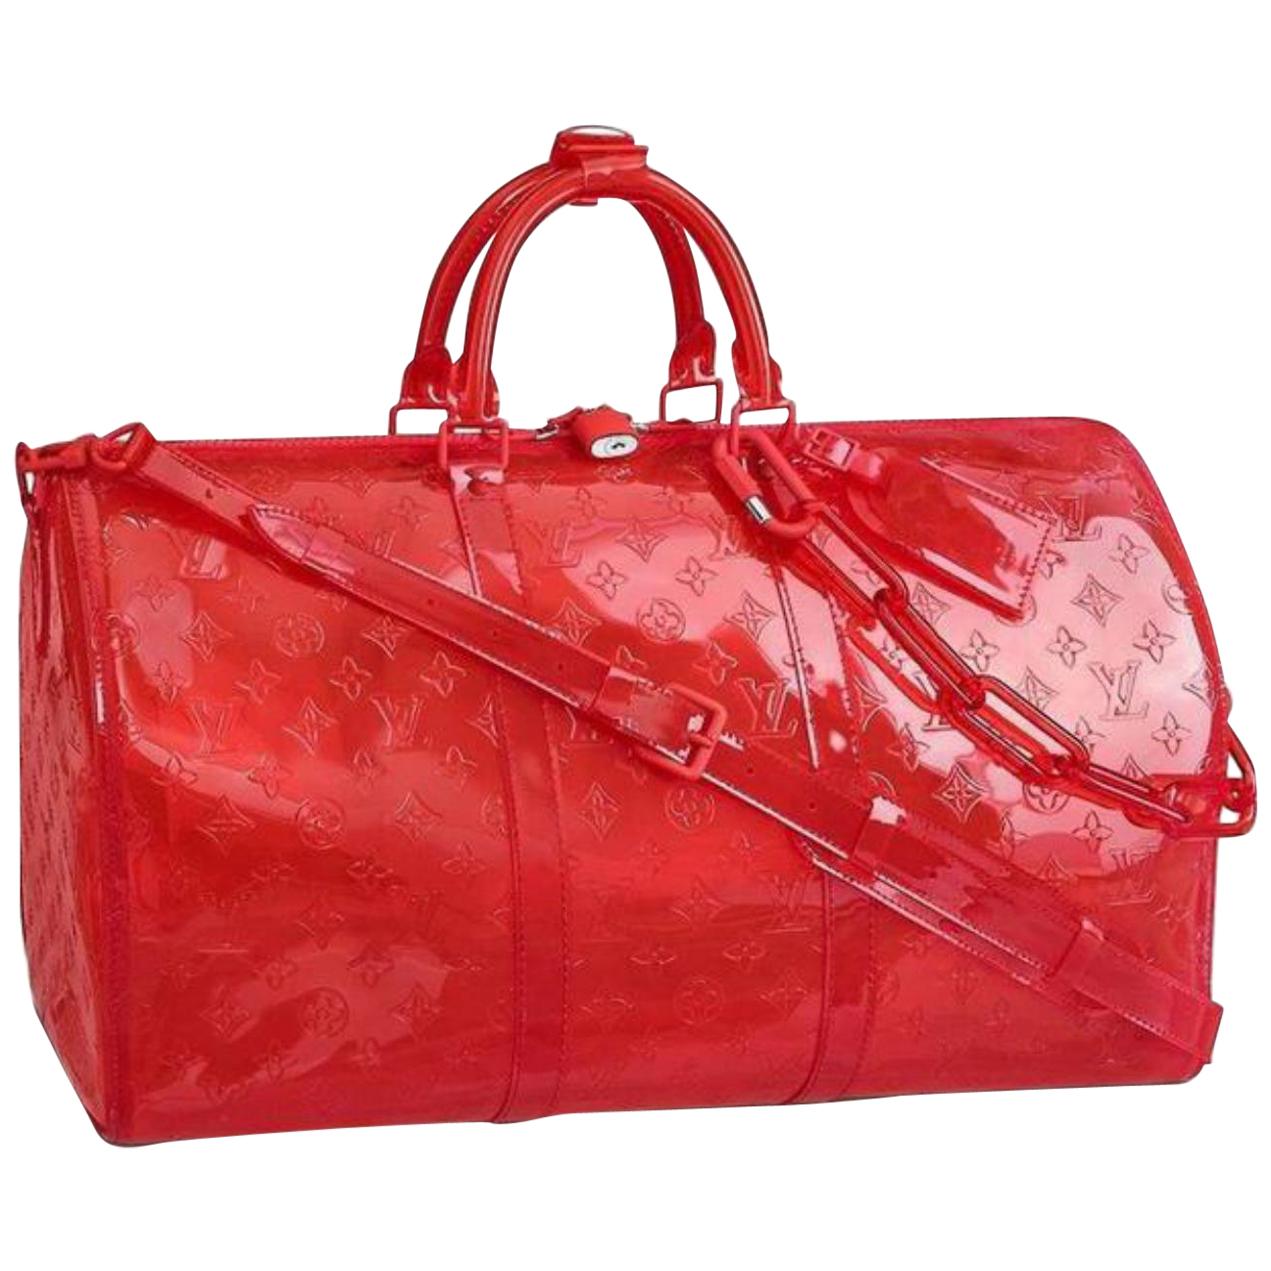 Louis Vuitton Keepall Rgb Clear Ss19 Virgil  50 870439 Red Pvc  Travel Bag For Sale